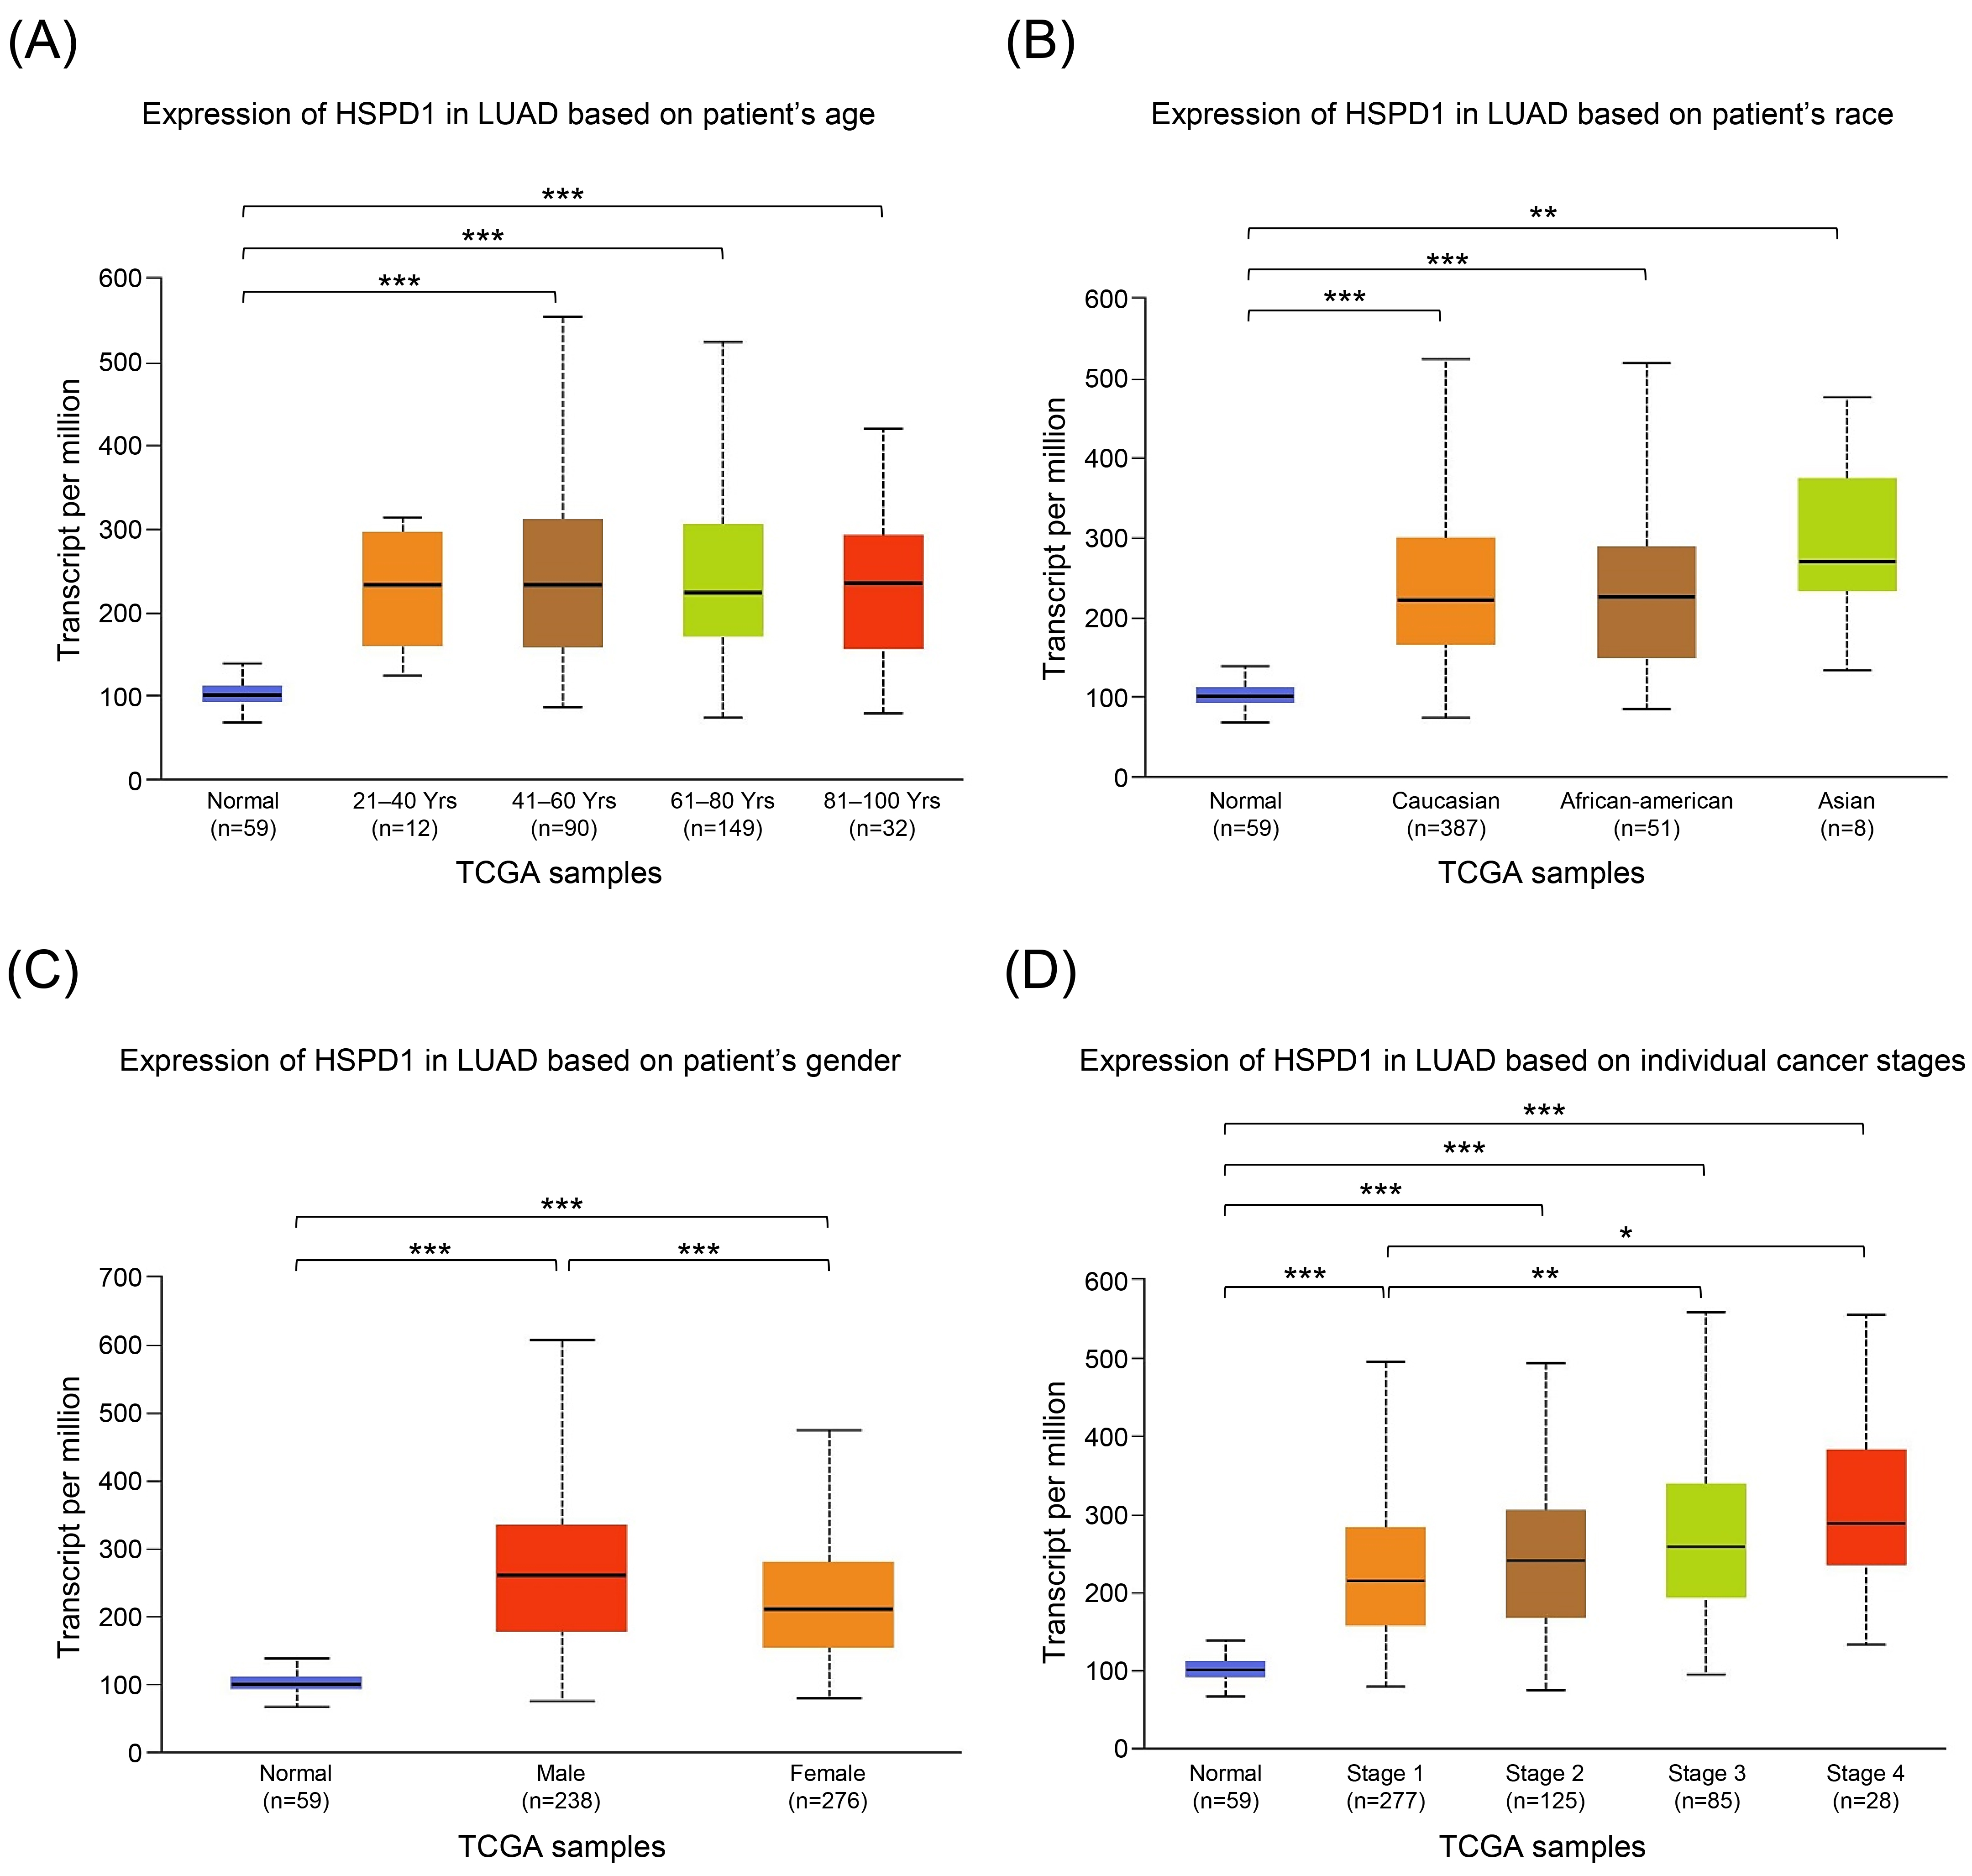 Relationship between HSPD1 expression and clinicopathological parameters in LUAD patients from TCGA dataset in UALCAN. HSPD1 expression in LUAD patients based on (A) age, (B) race, (C) gender, and (D) individual cancer stages. *p < 0.05, **p < 0.01, ***p < 0.001.